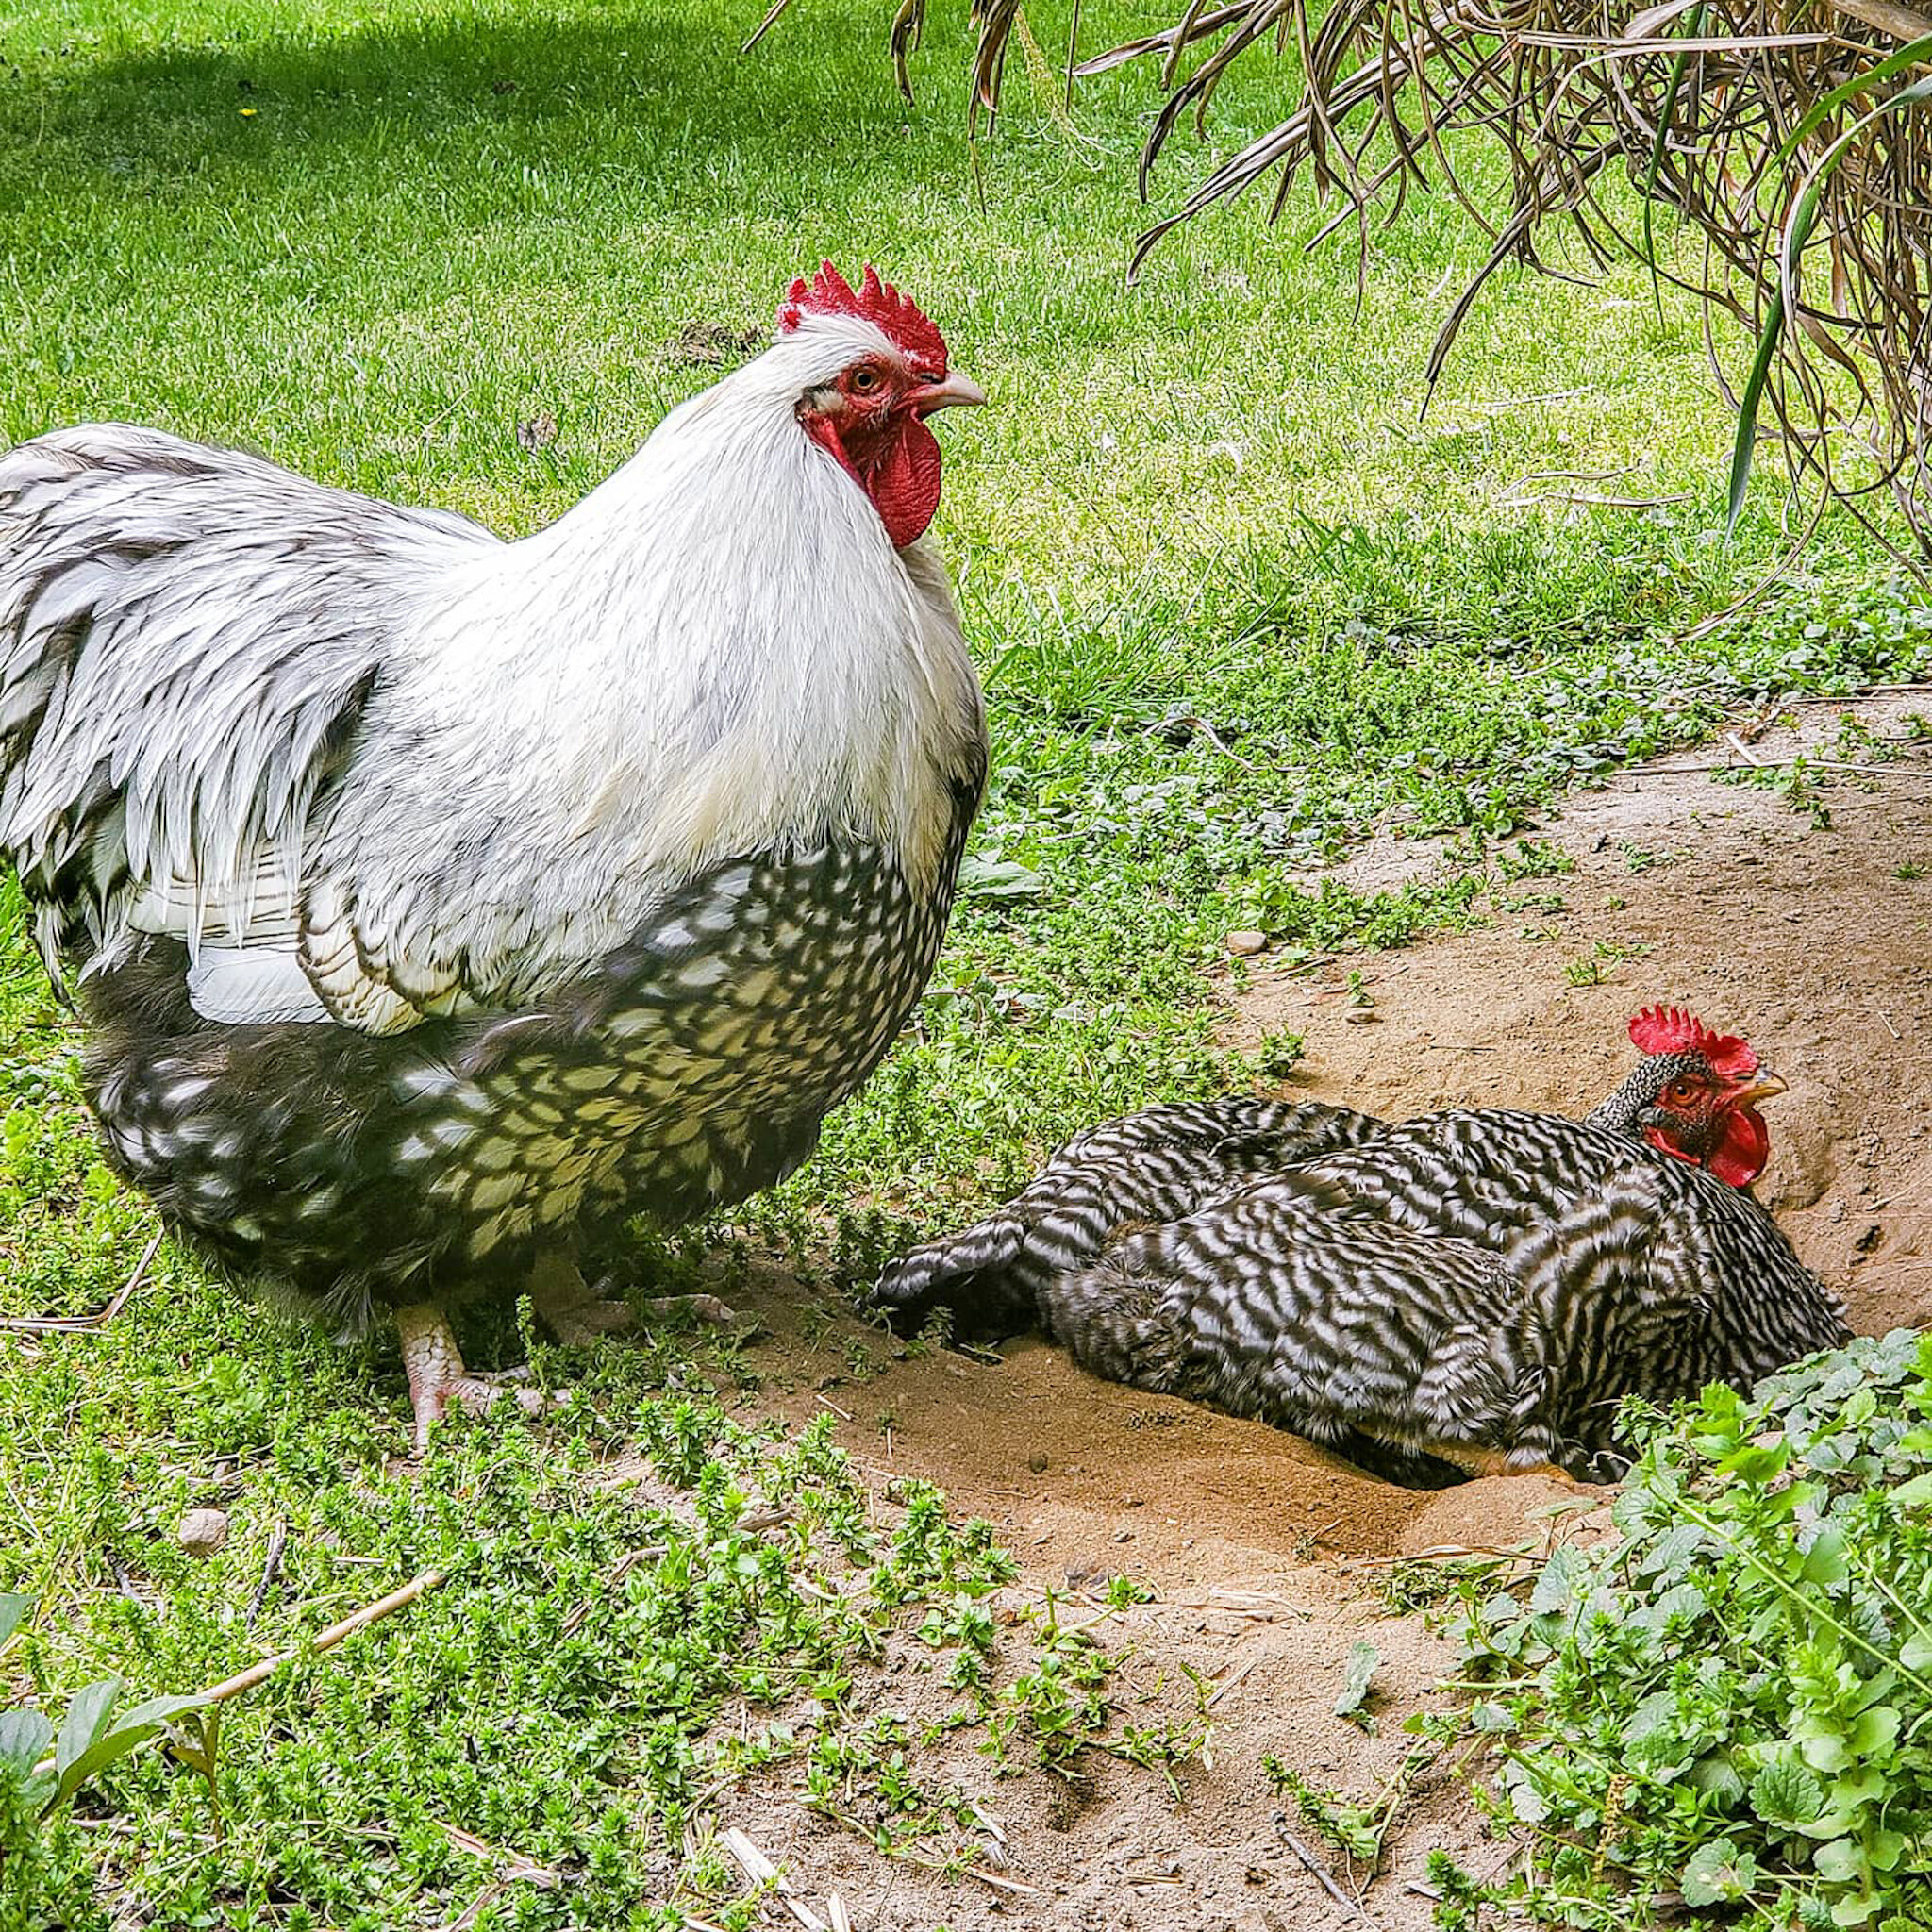 Chickens dustbathing to stay cool